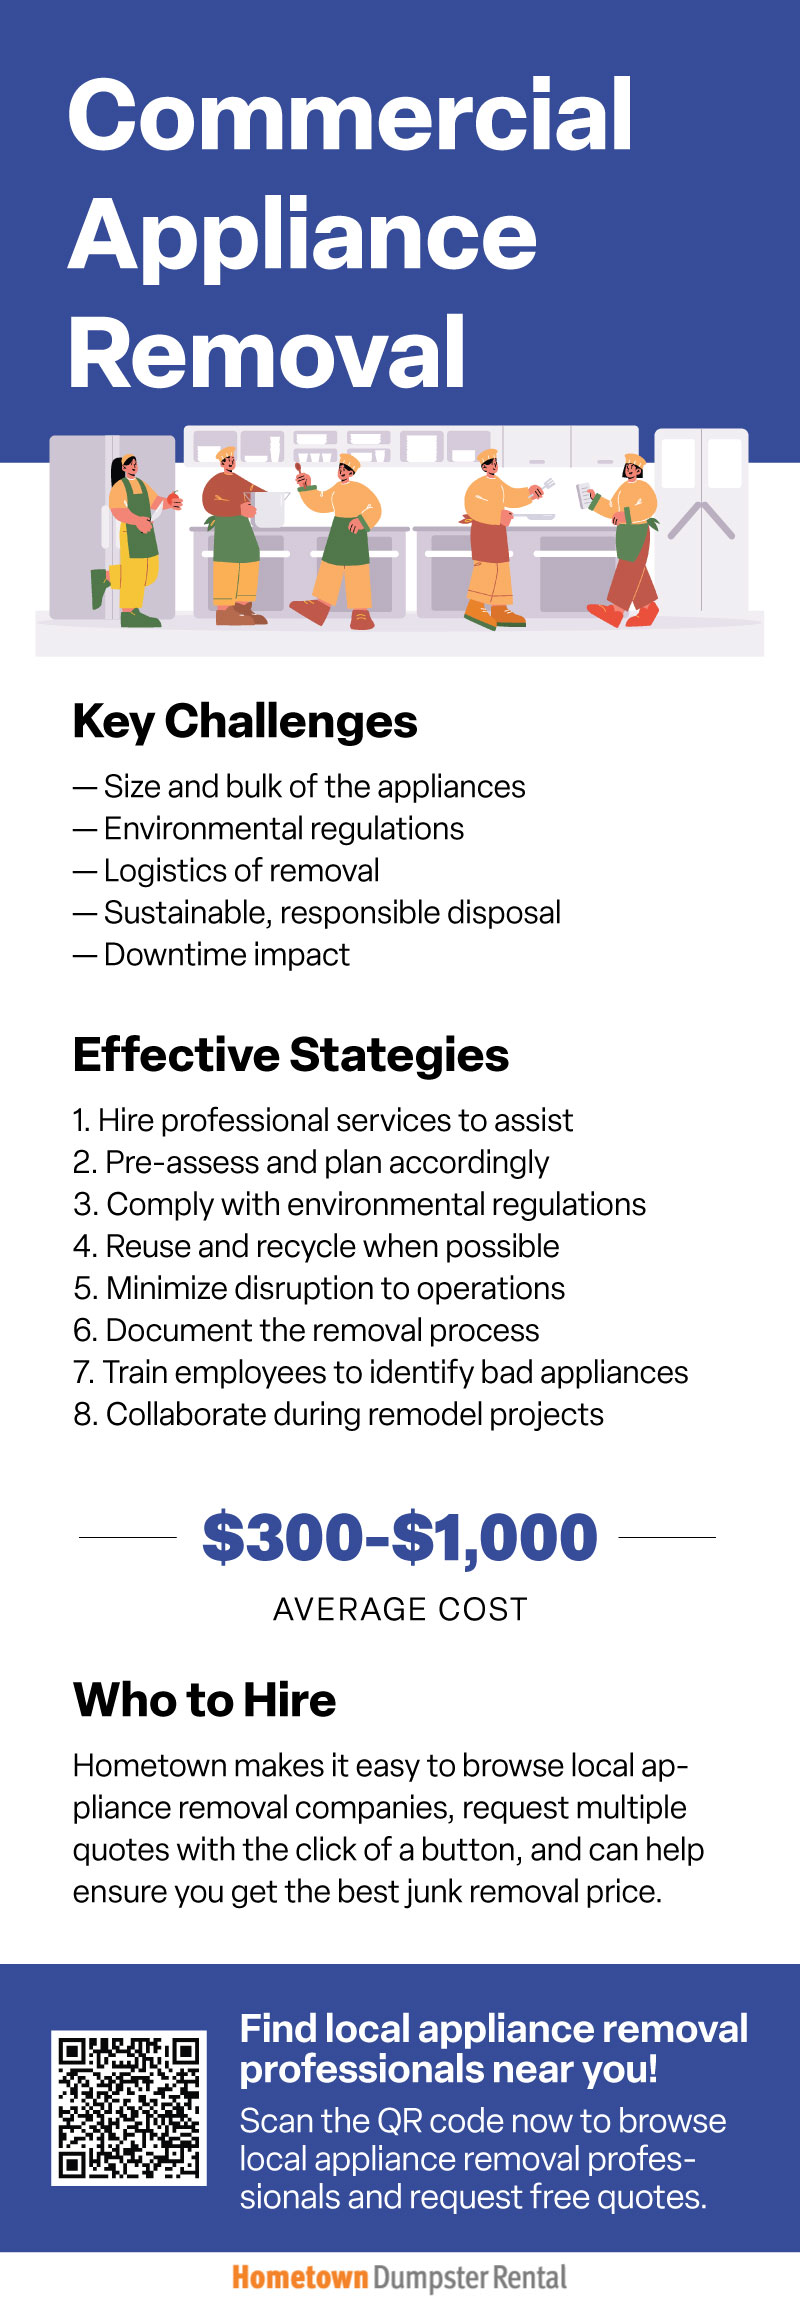 commercial appliance removal infographic